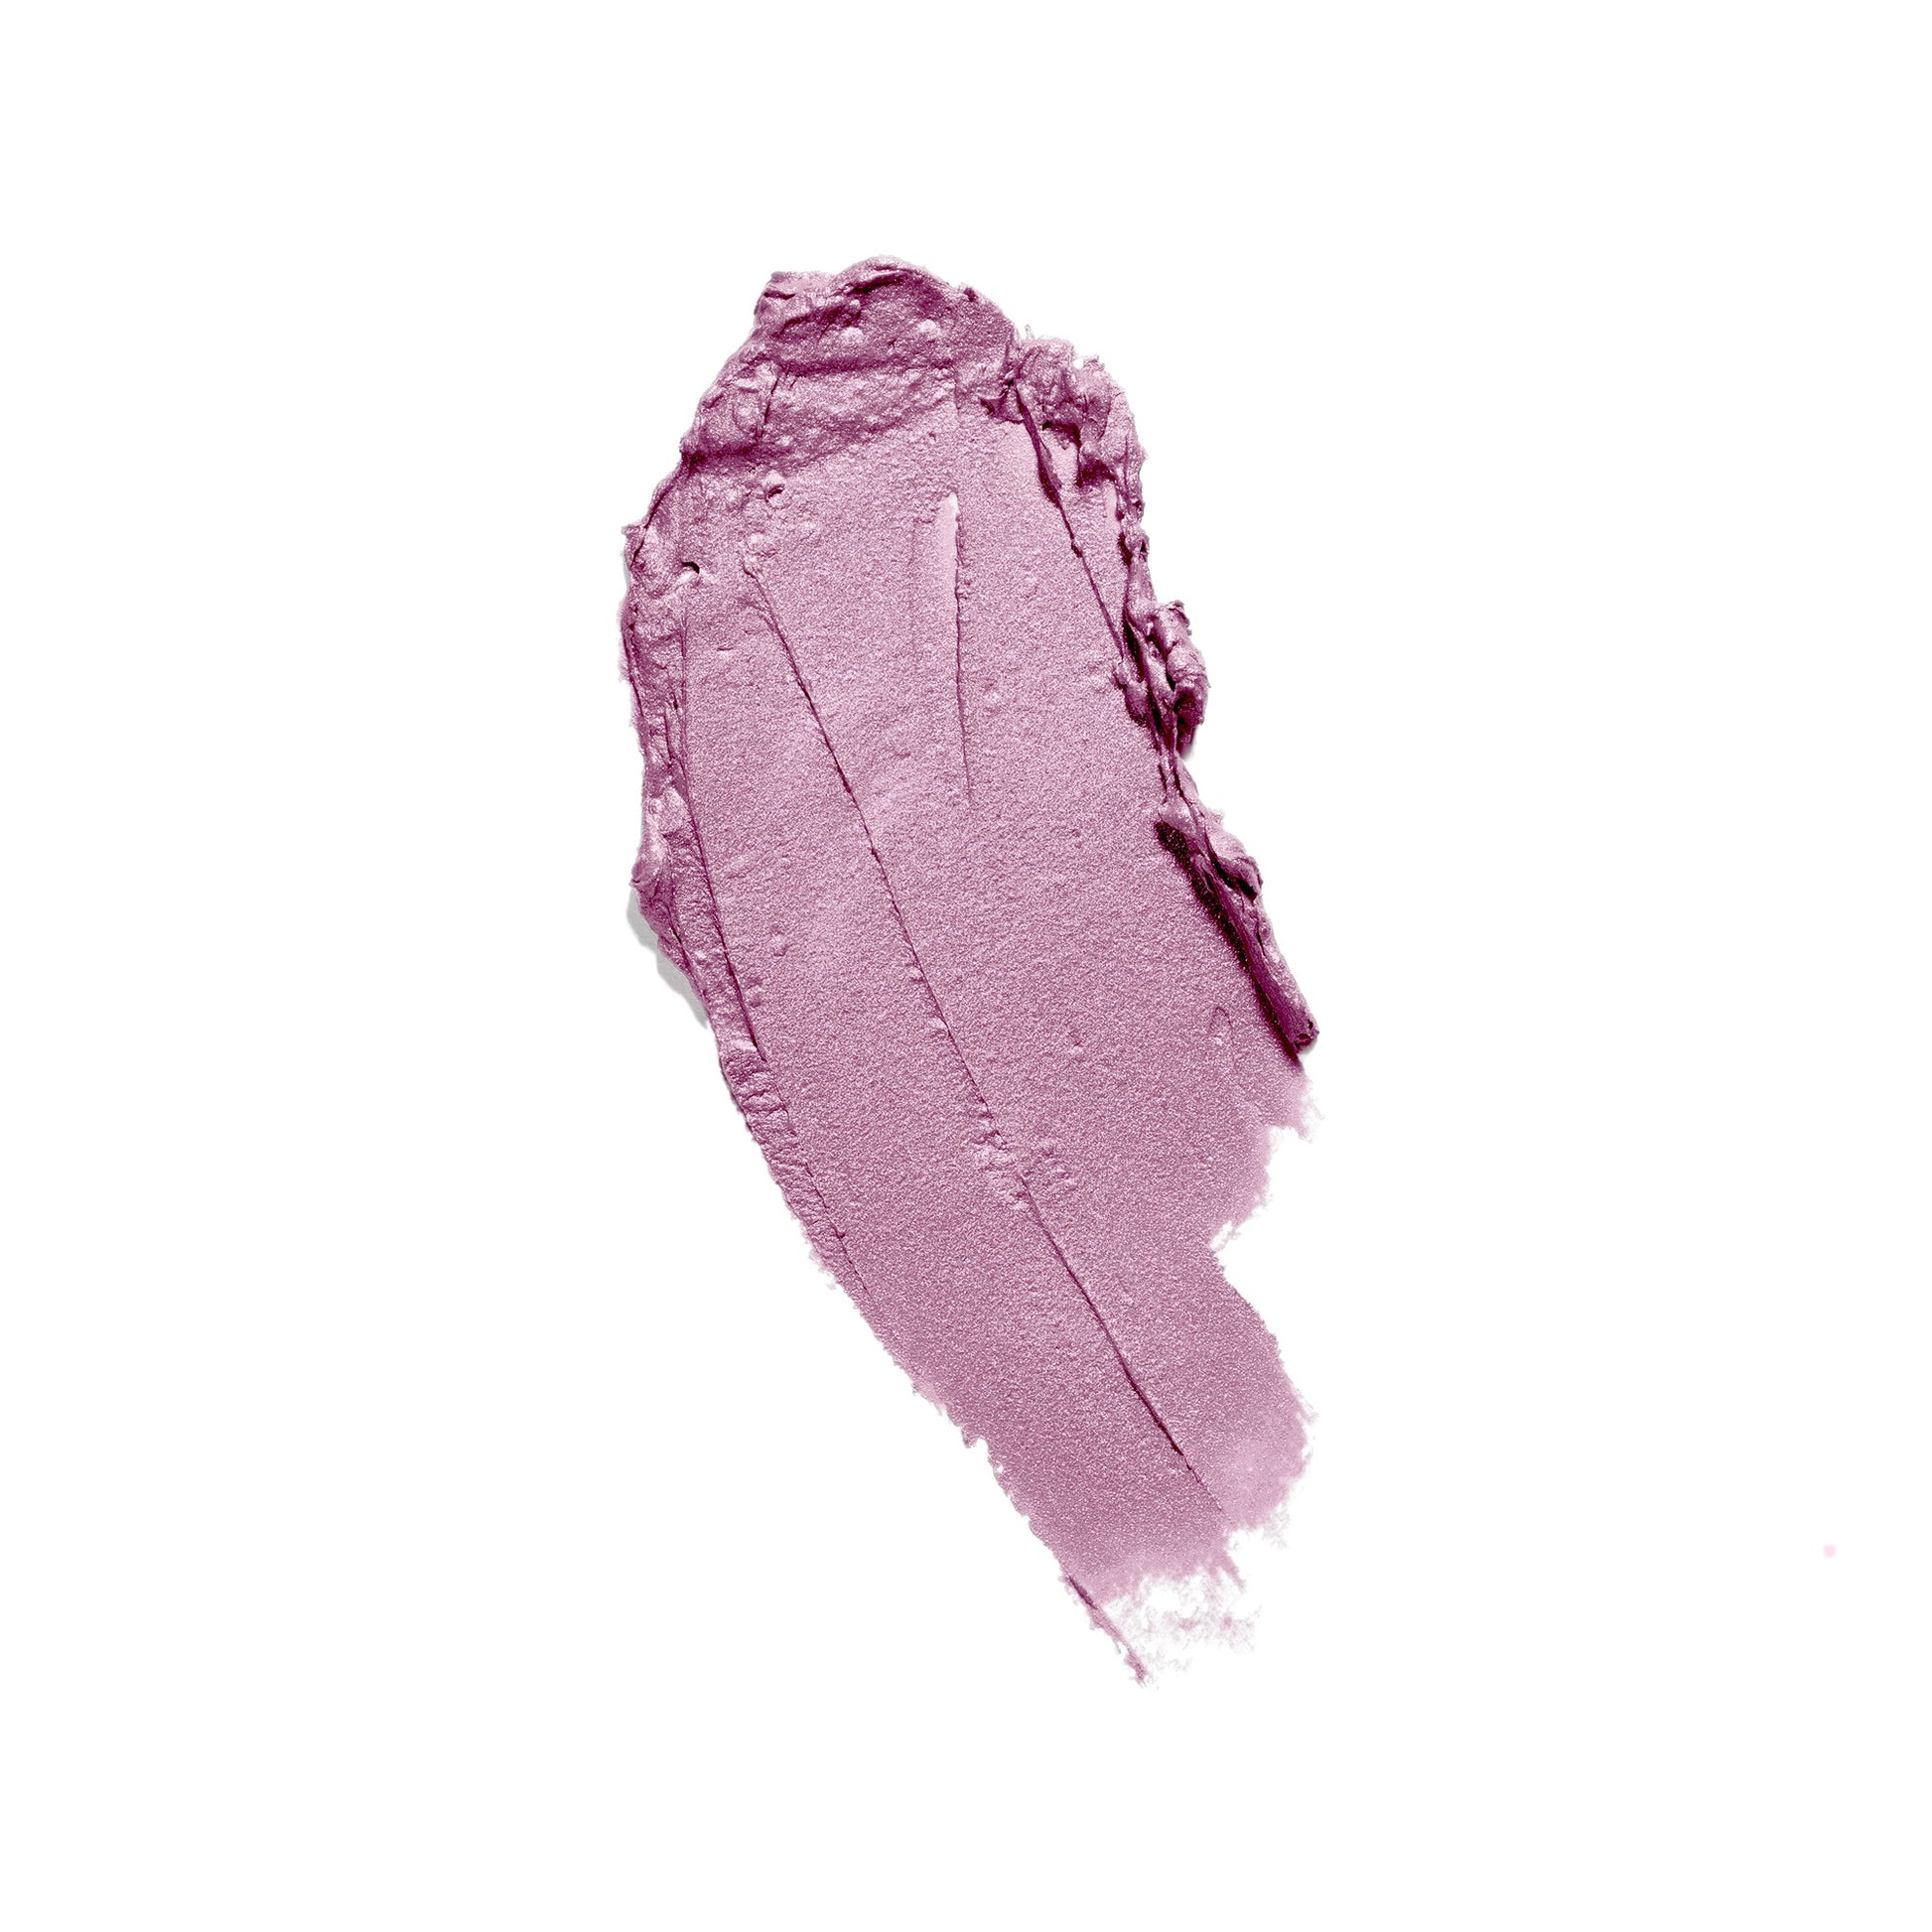 NXTE NXTEssence Cotton Candy Lip Stick Swatch Color